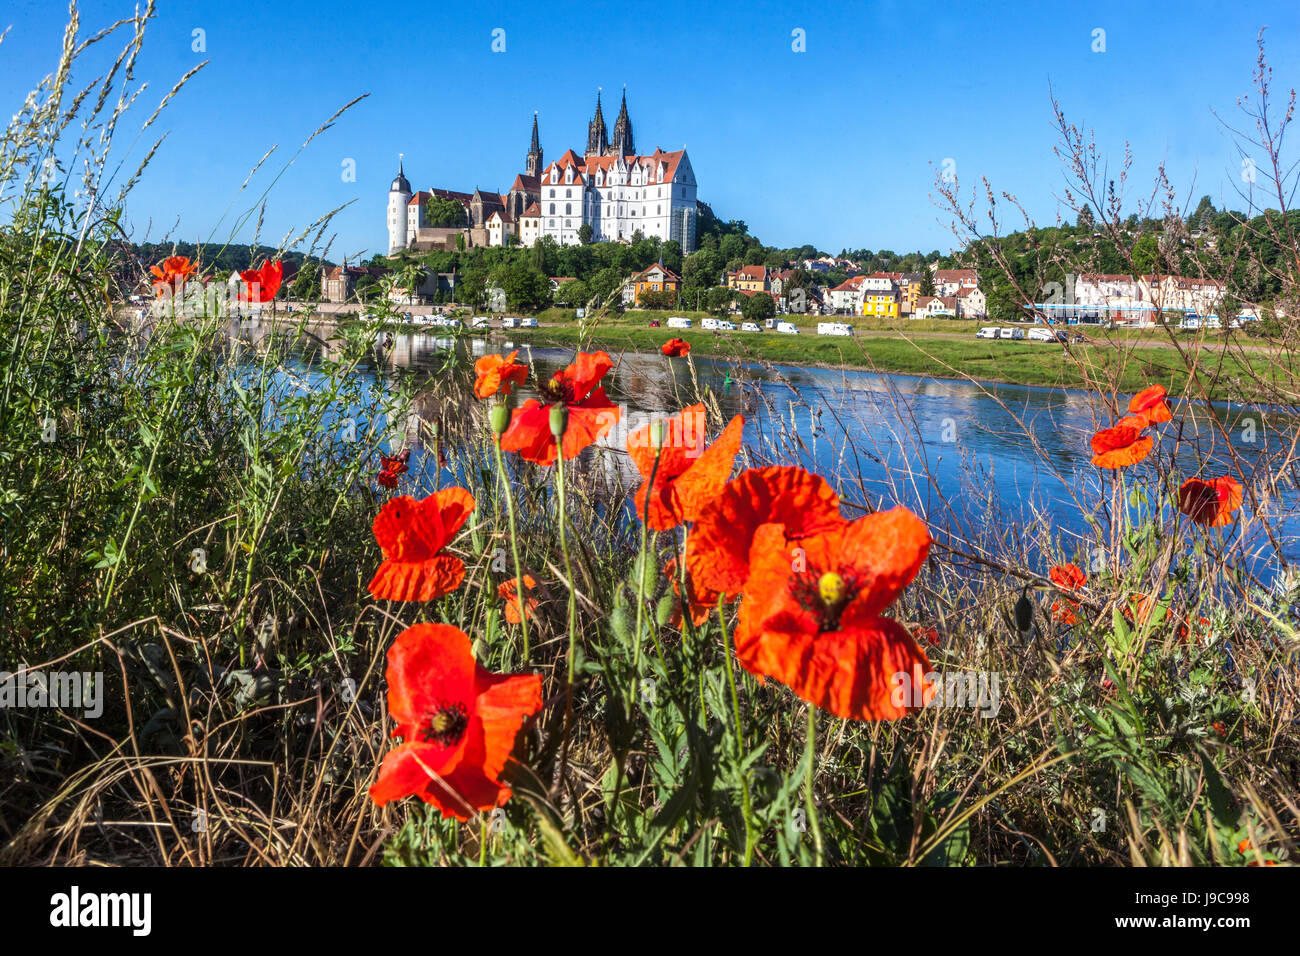 Albrechtsburg Castle Meissen Germany Saxony, Red meadow poppies flowering on the riverbank of Elbe river Germany Castle Europe landscape wildflowers Stock Photo